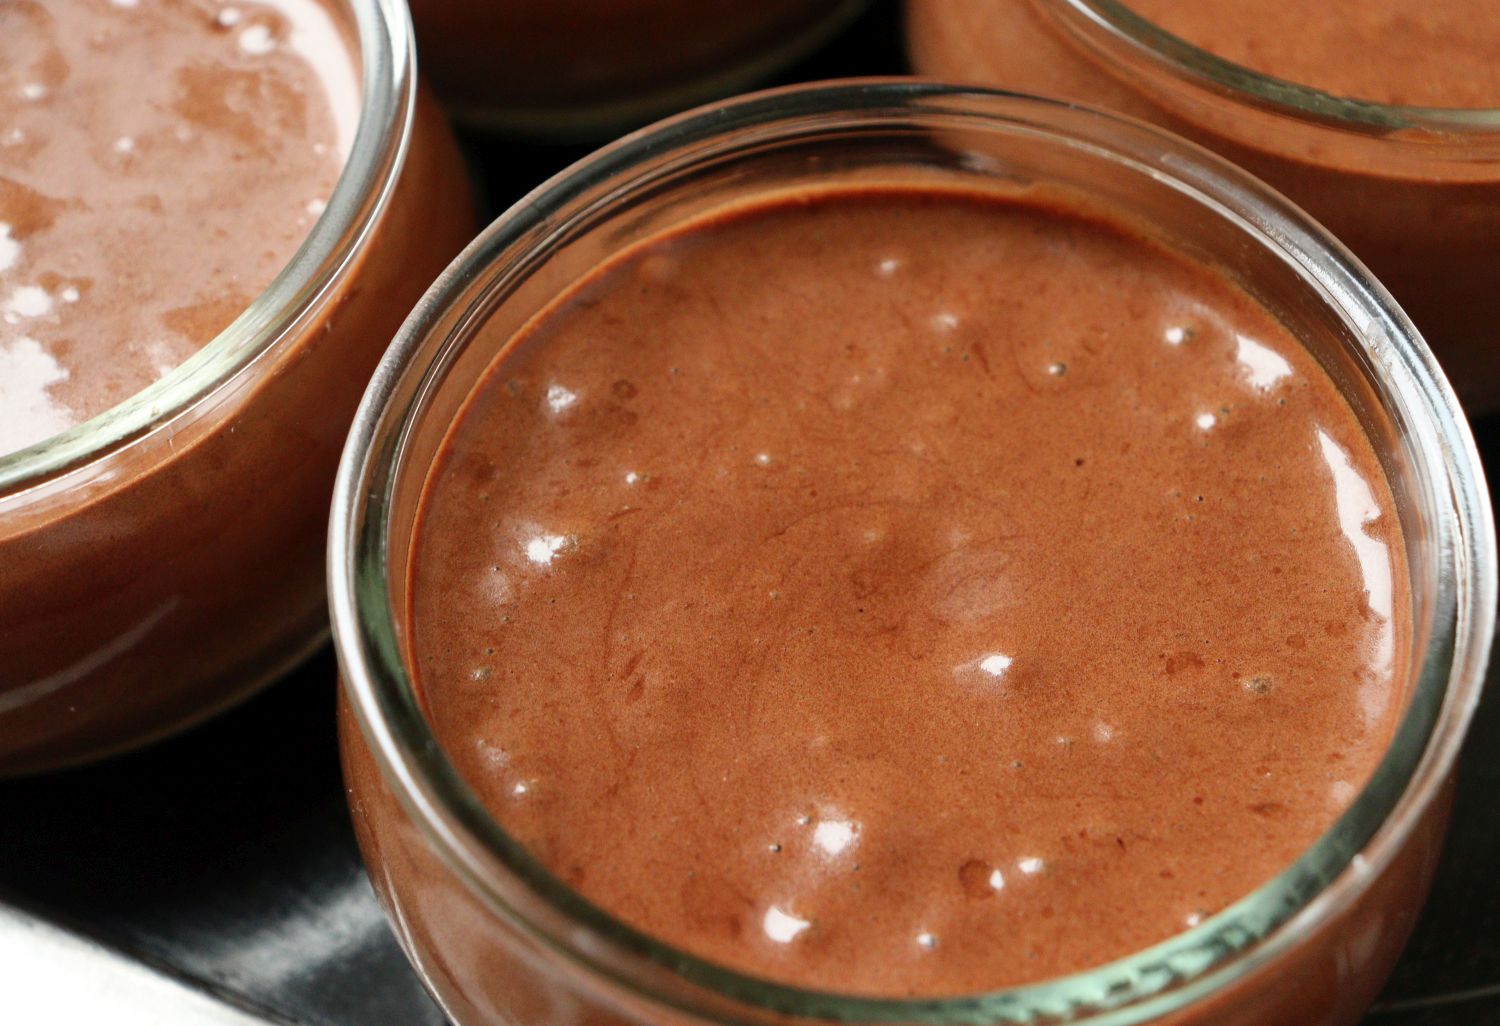 Nina Recipes - Chocolate Mousse (Mousse au chocolat): putting the chocolate mousse in the serving recipients and let it cool down overnight